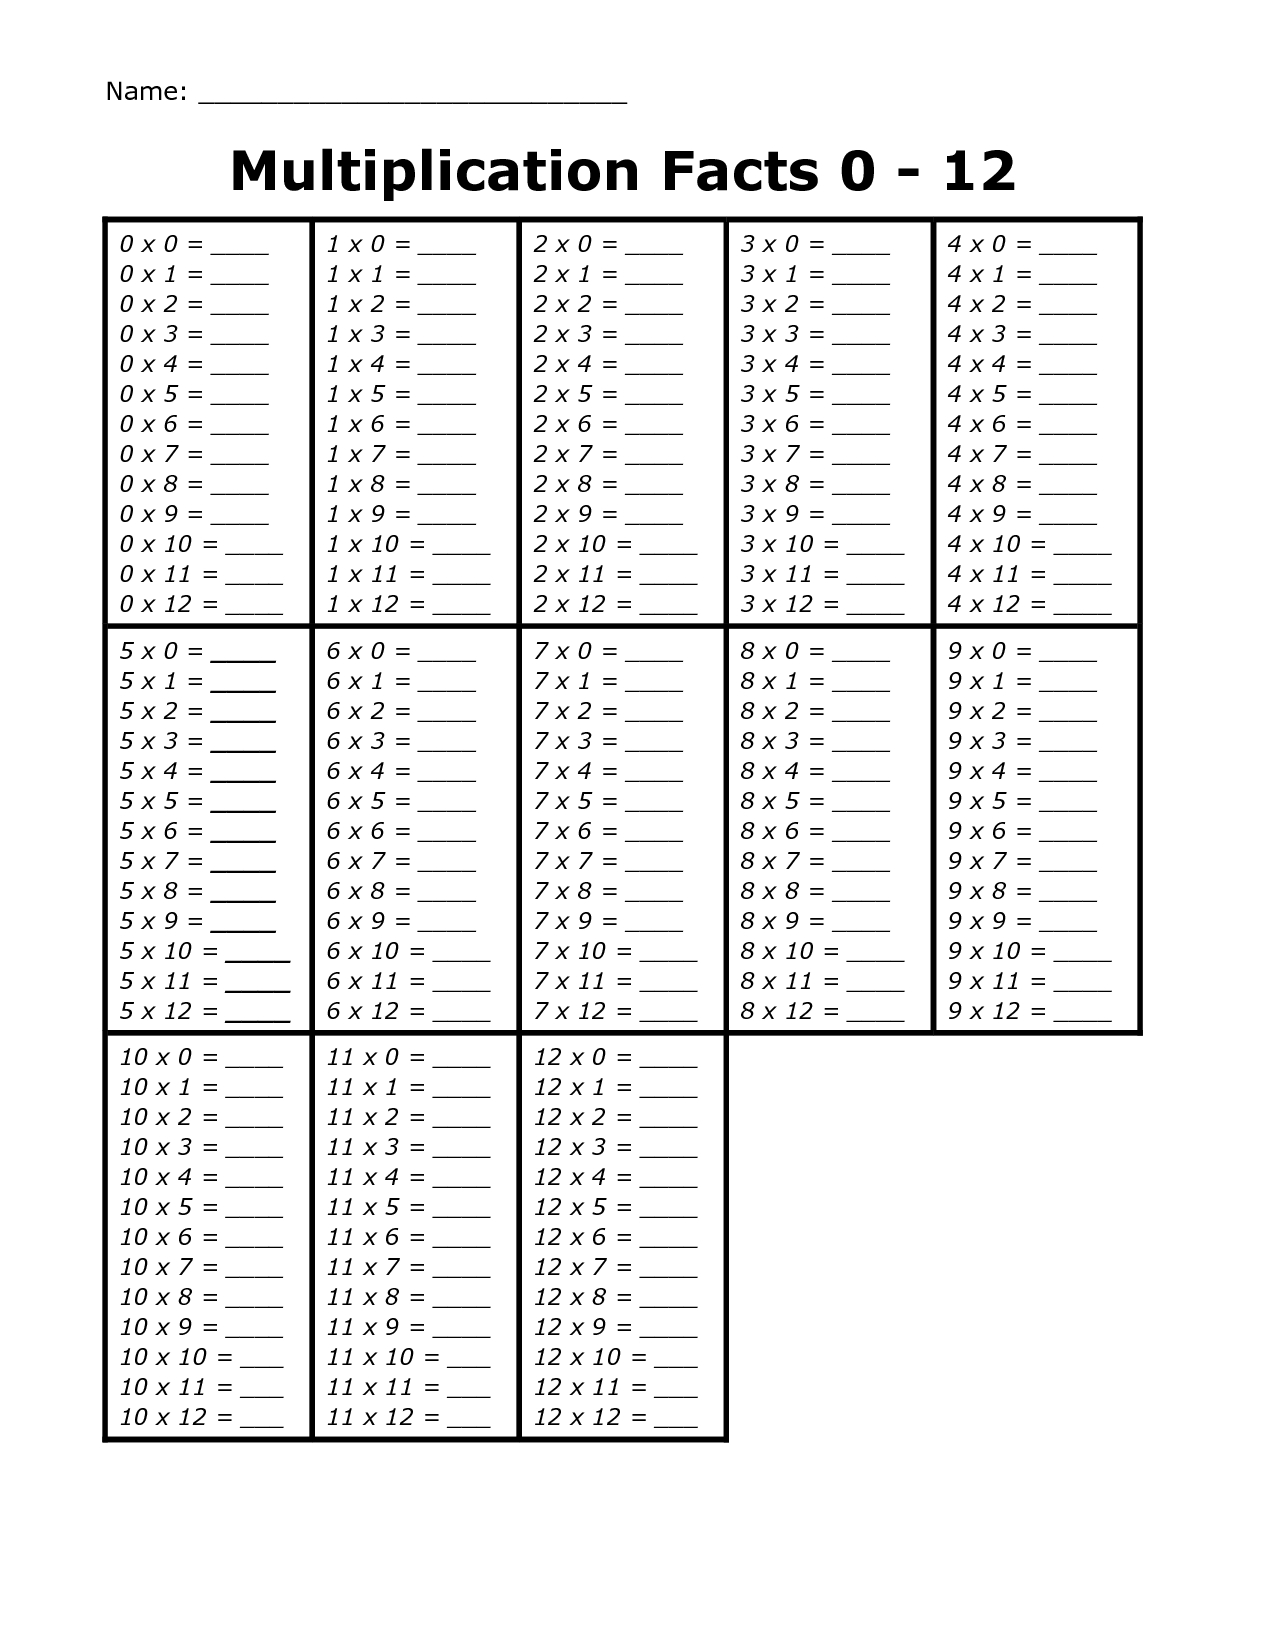 Printable Multiplication Facts 0 12 | Multiplication Facts with regard to Printable Multiplication Quizzes 0-12